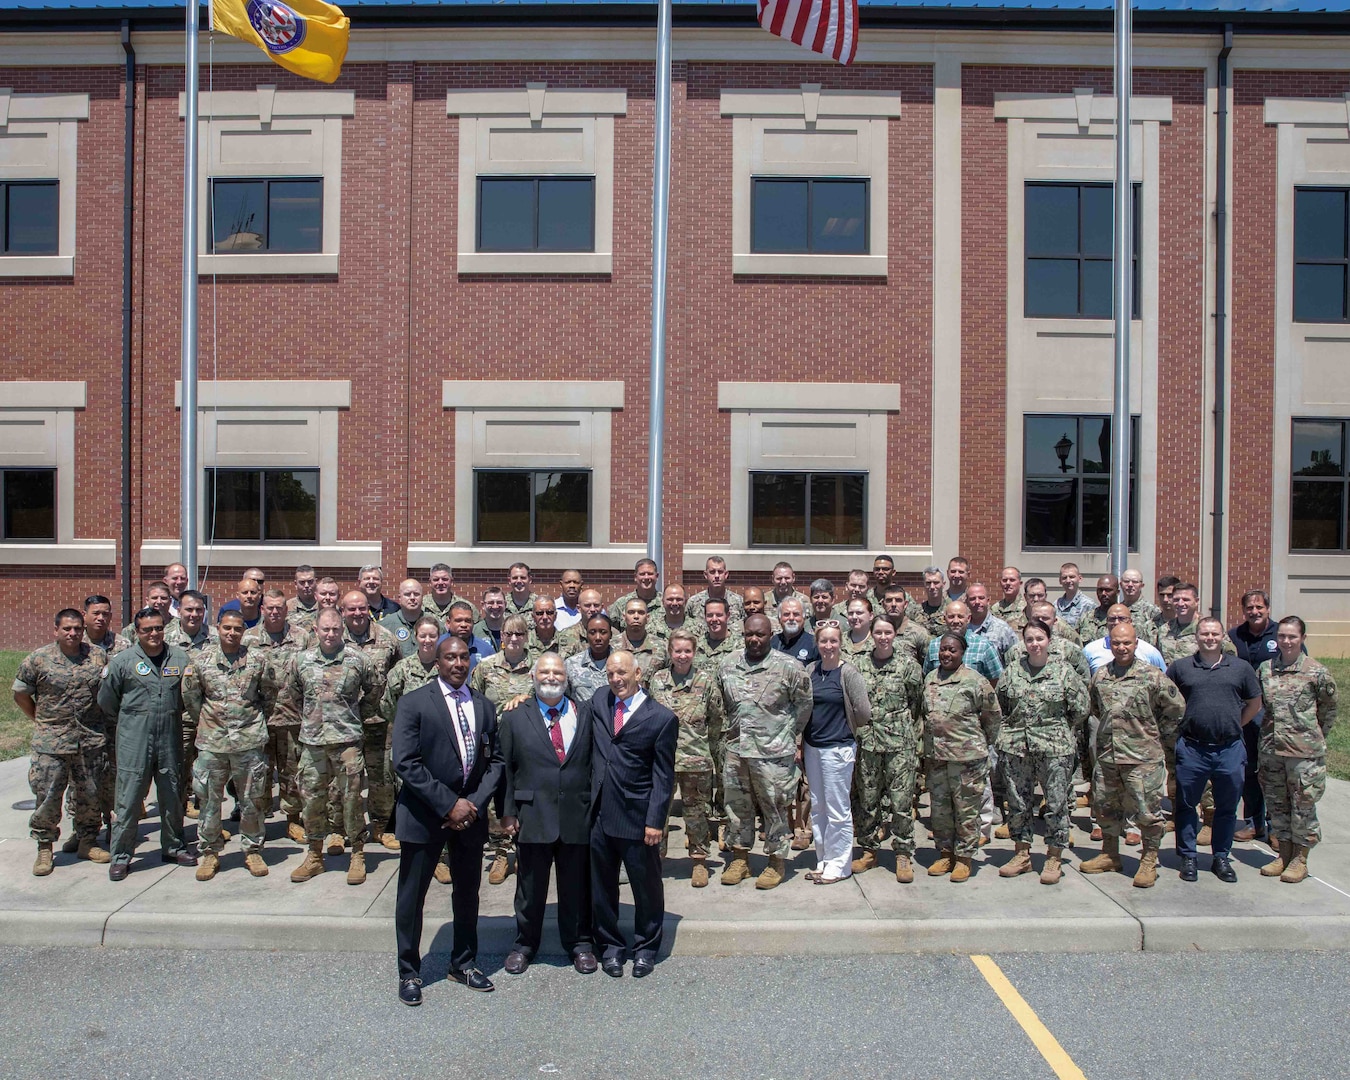 Students from the Department of Defense (DoD) Defense Support of Civil Support Authorities (DSCA) II course gather for a group photo outside of the Joint Task Force Civil Support (JTF-CS) headquarters. The course was held July 16-19 and educated 62 members of the United States military and other federal agencies in planning, coordinating, executing and supporting DSCA operations.  The course is administered in three distinct phases: Phase I is an 8-hour distance learning preparatory course, Phase II is a 3.5 day resident course, and Phase III is continuing education through alumni updates. (Official DoD photo by Mass Communication Specialist 3rd Class Michael Redd/released)